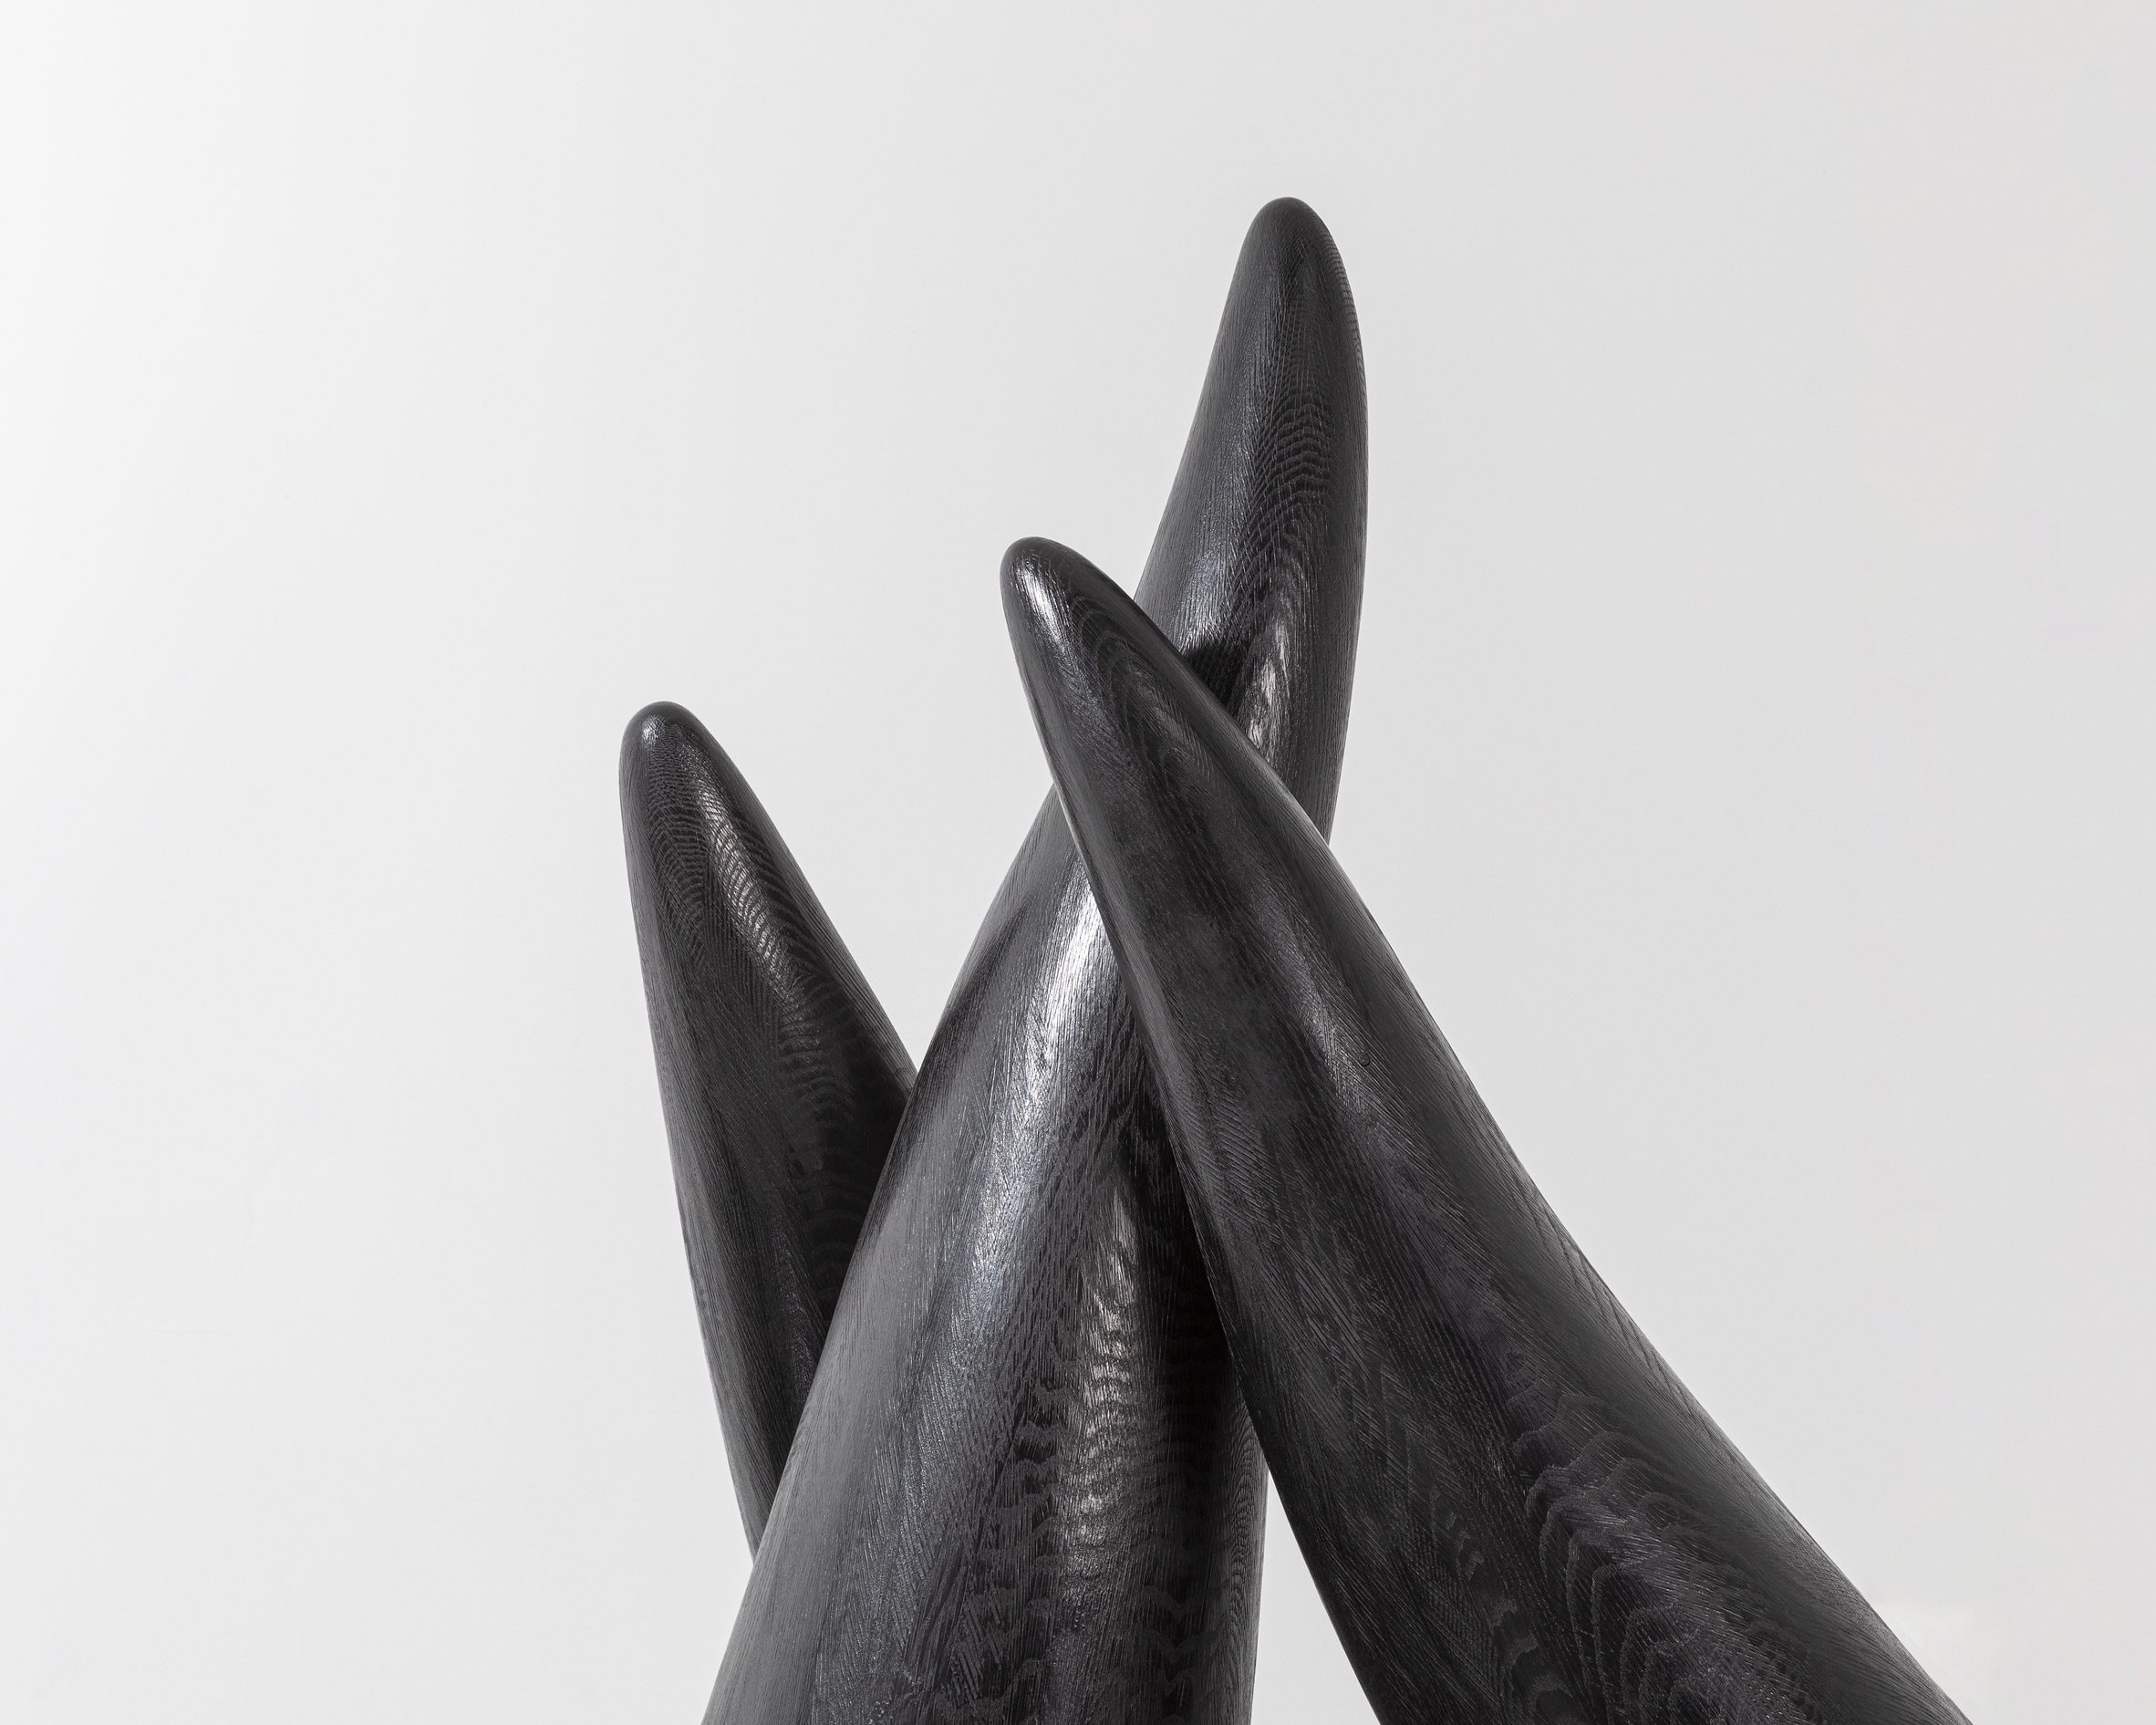 Close-up photo of tentacle-like ends on a smooth, black sculpture